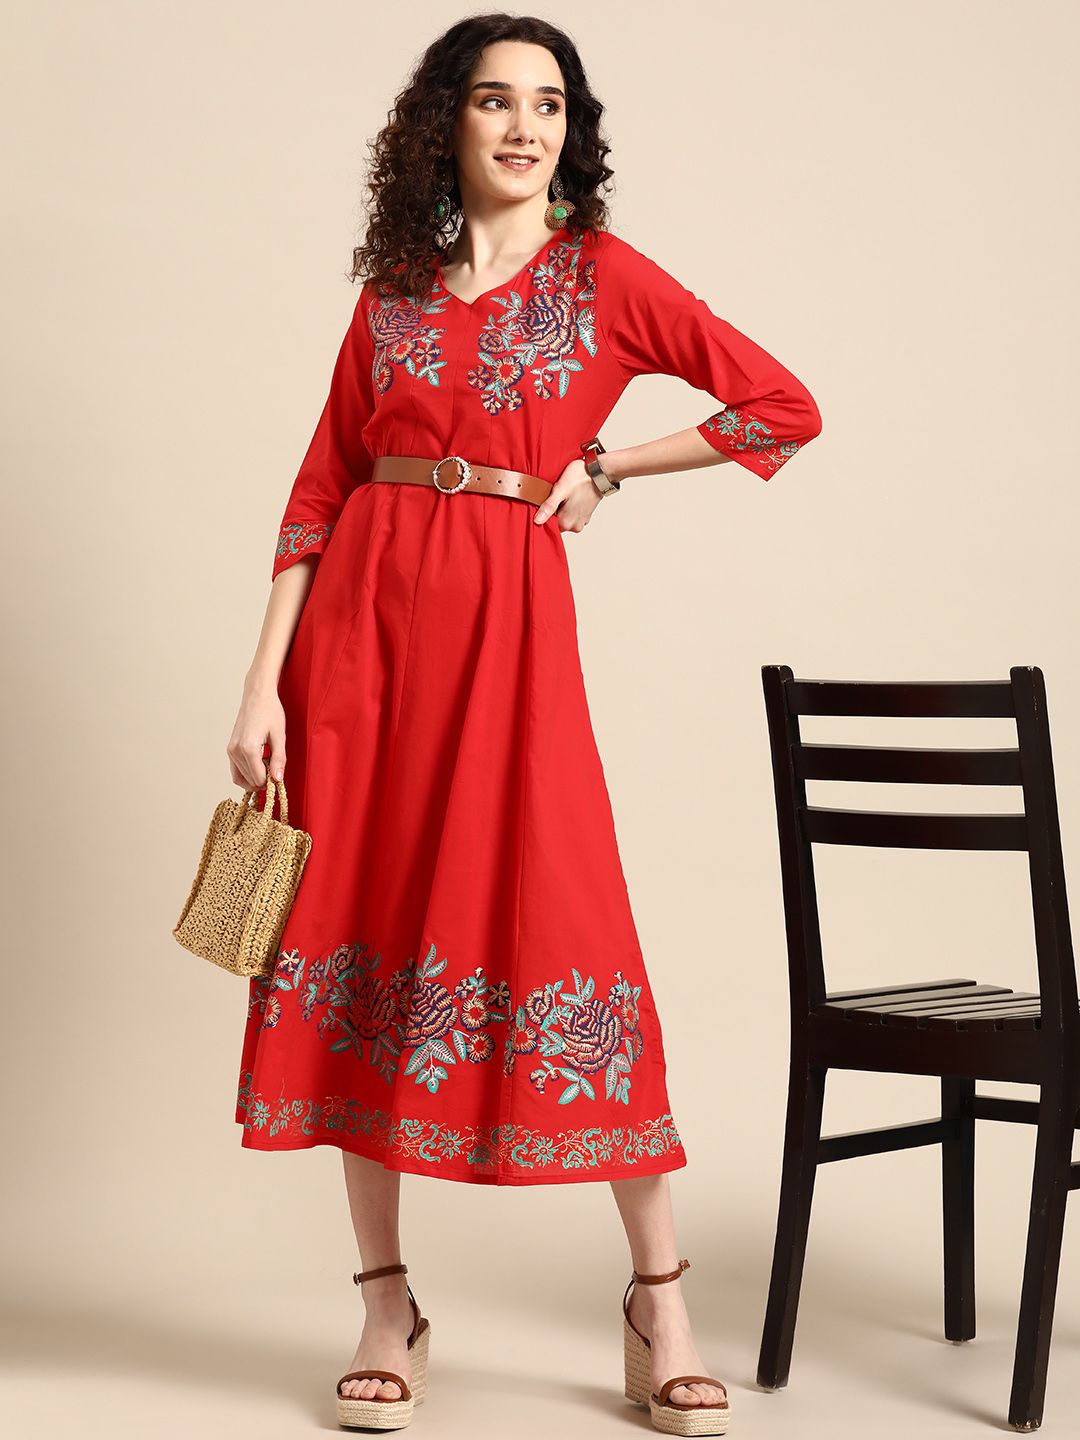 Sangria Red Floral Embroidered Ethnic Maxi Dress Price in India